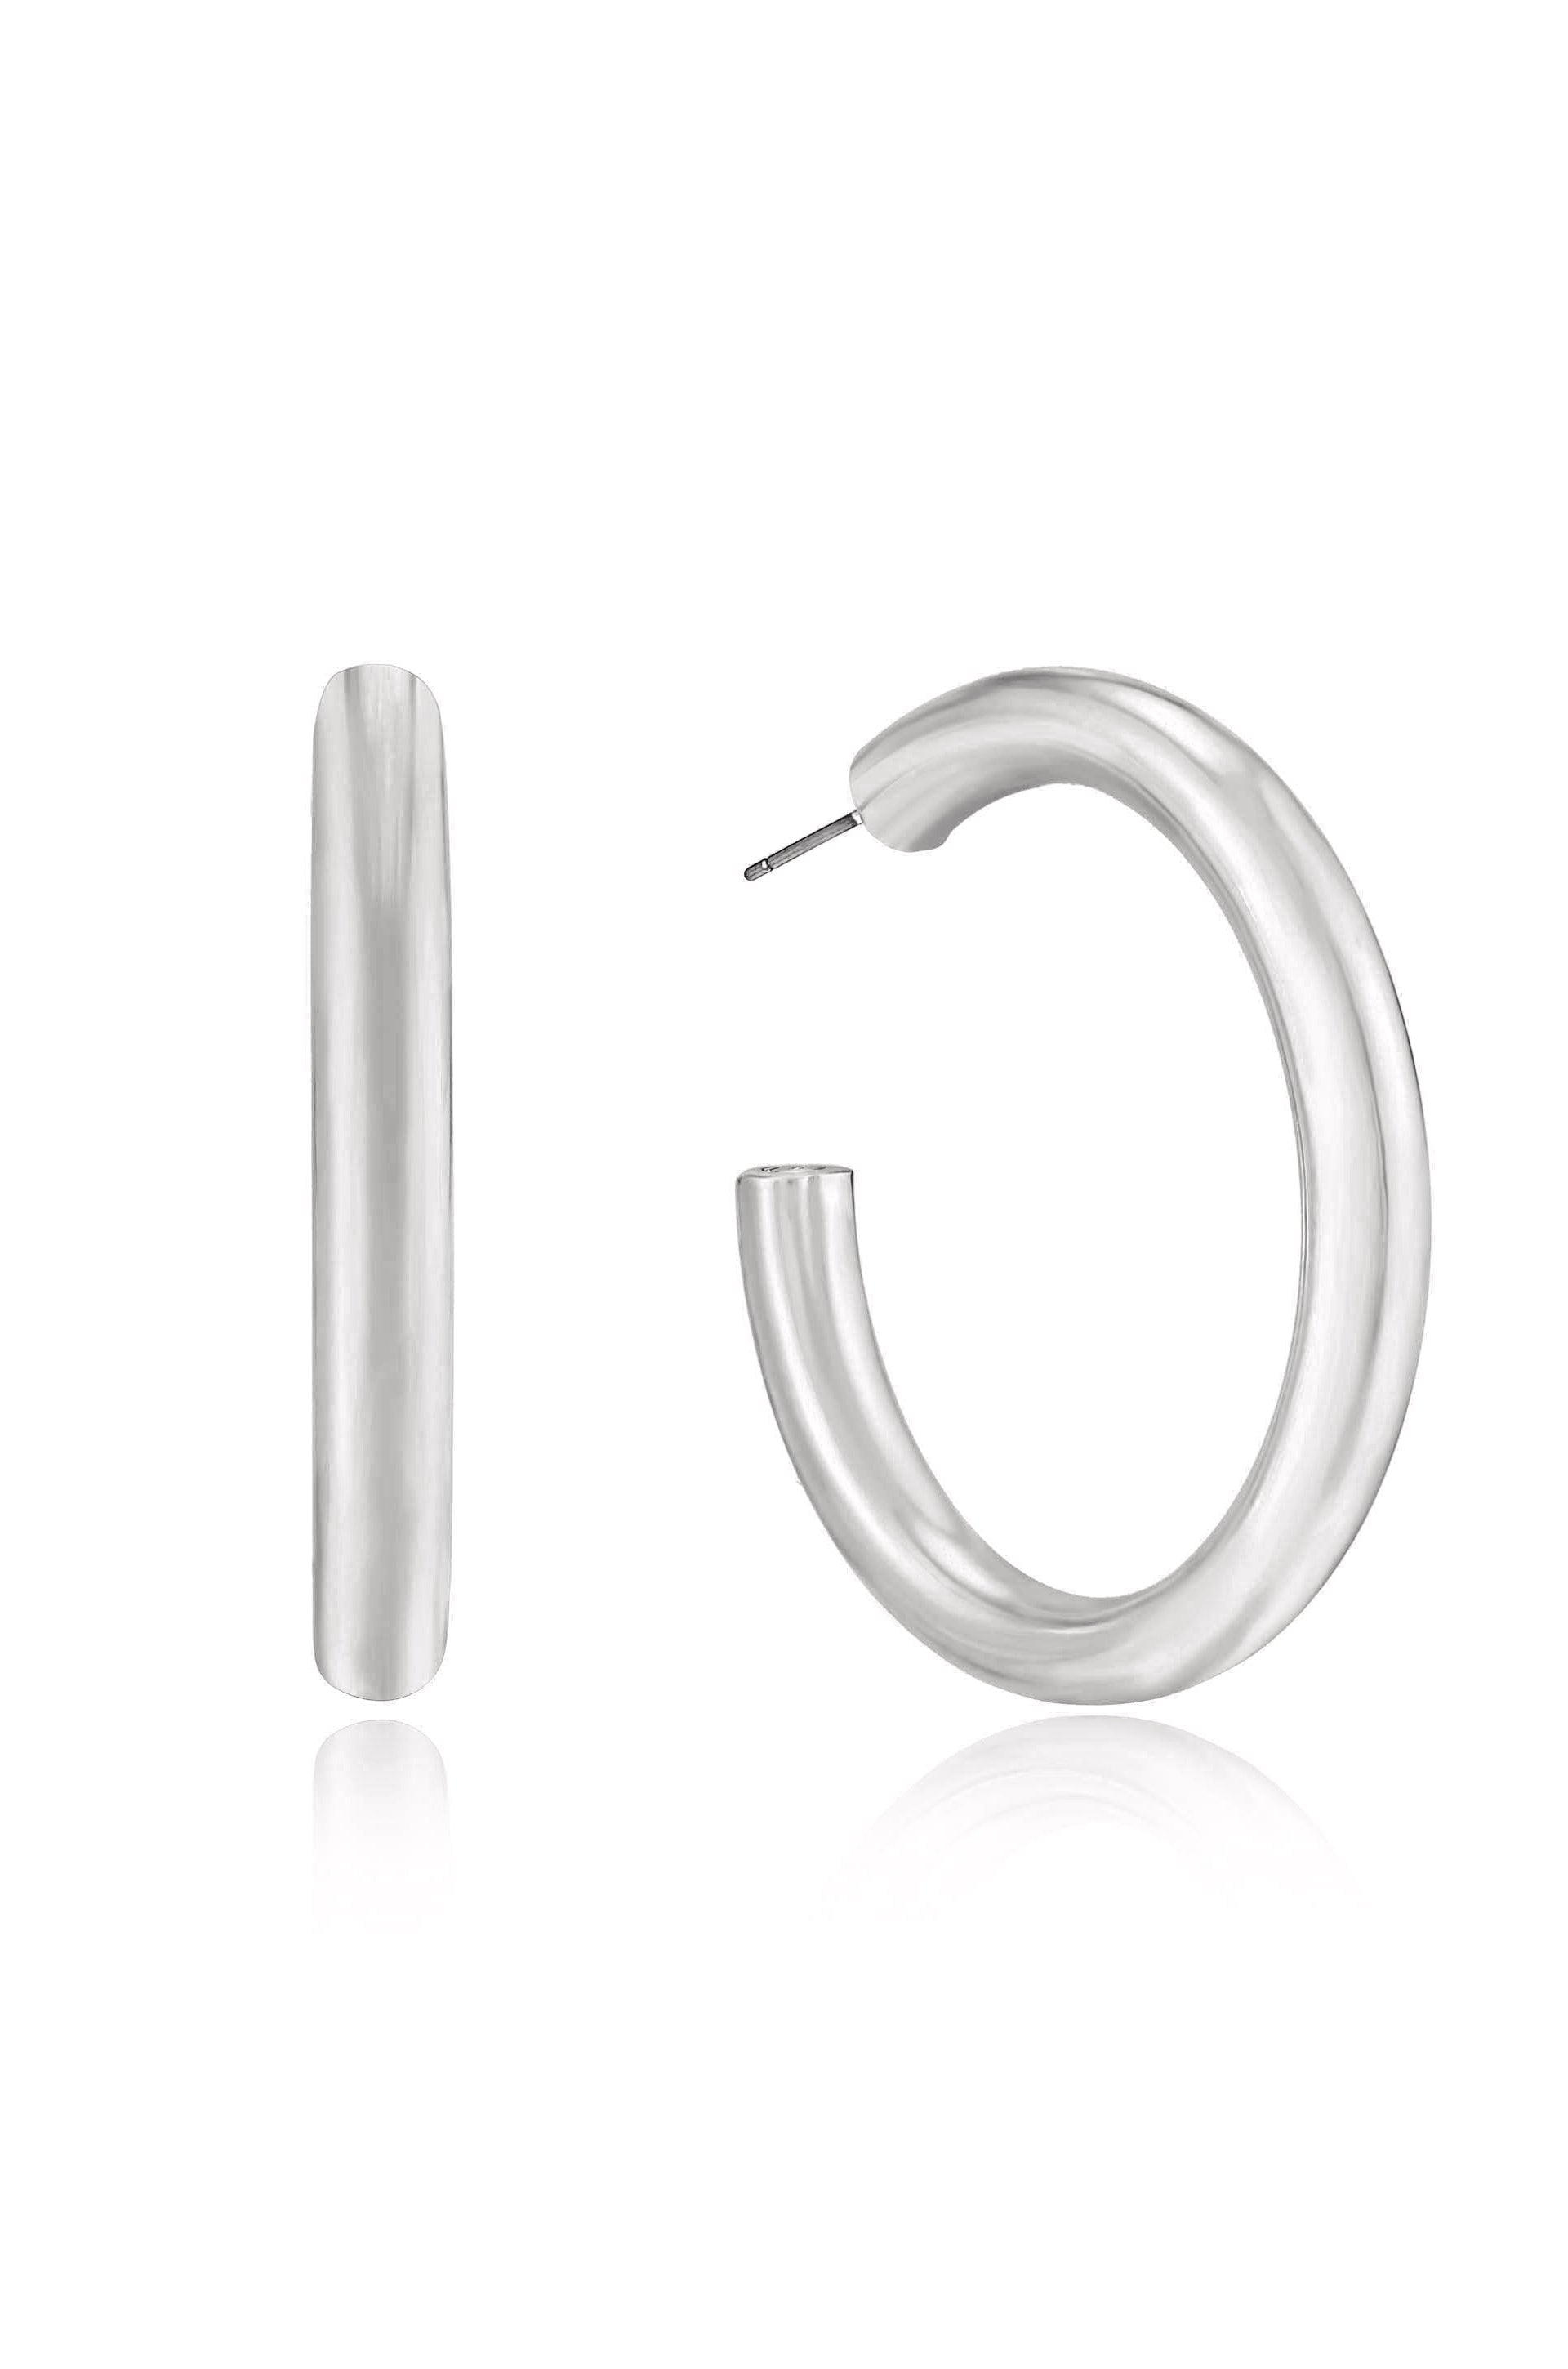 Thick Classic Hoops in large in rhodium